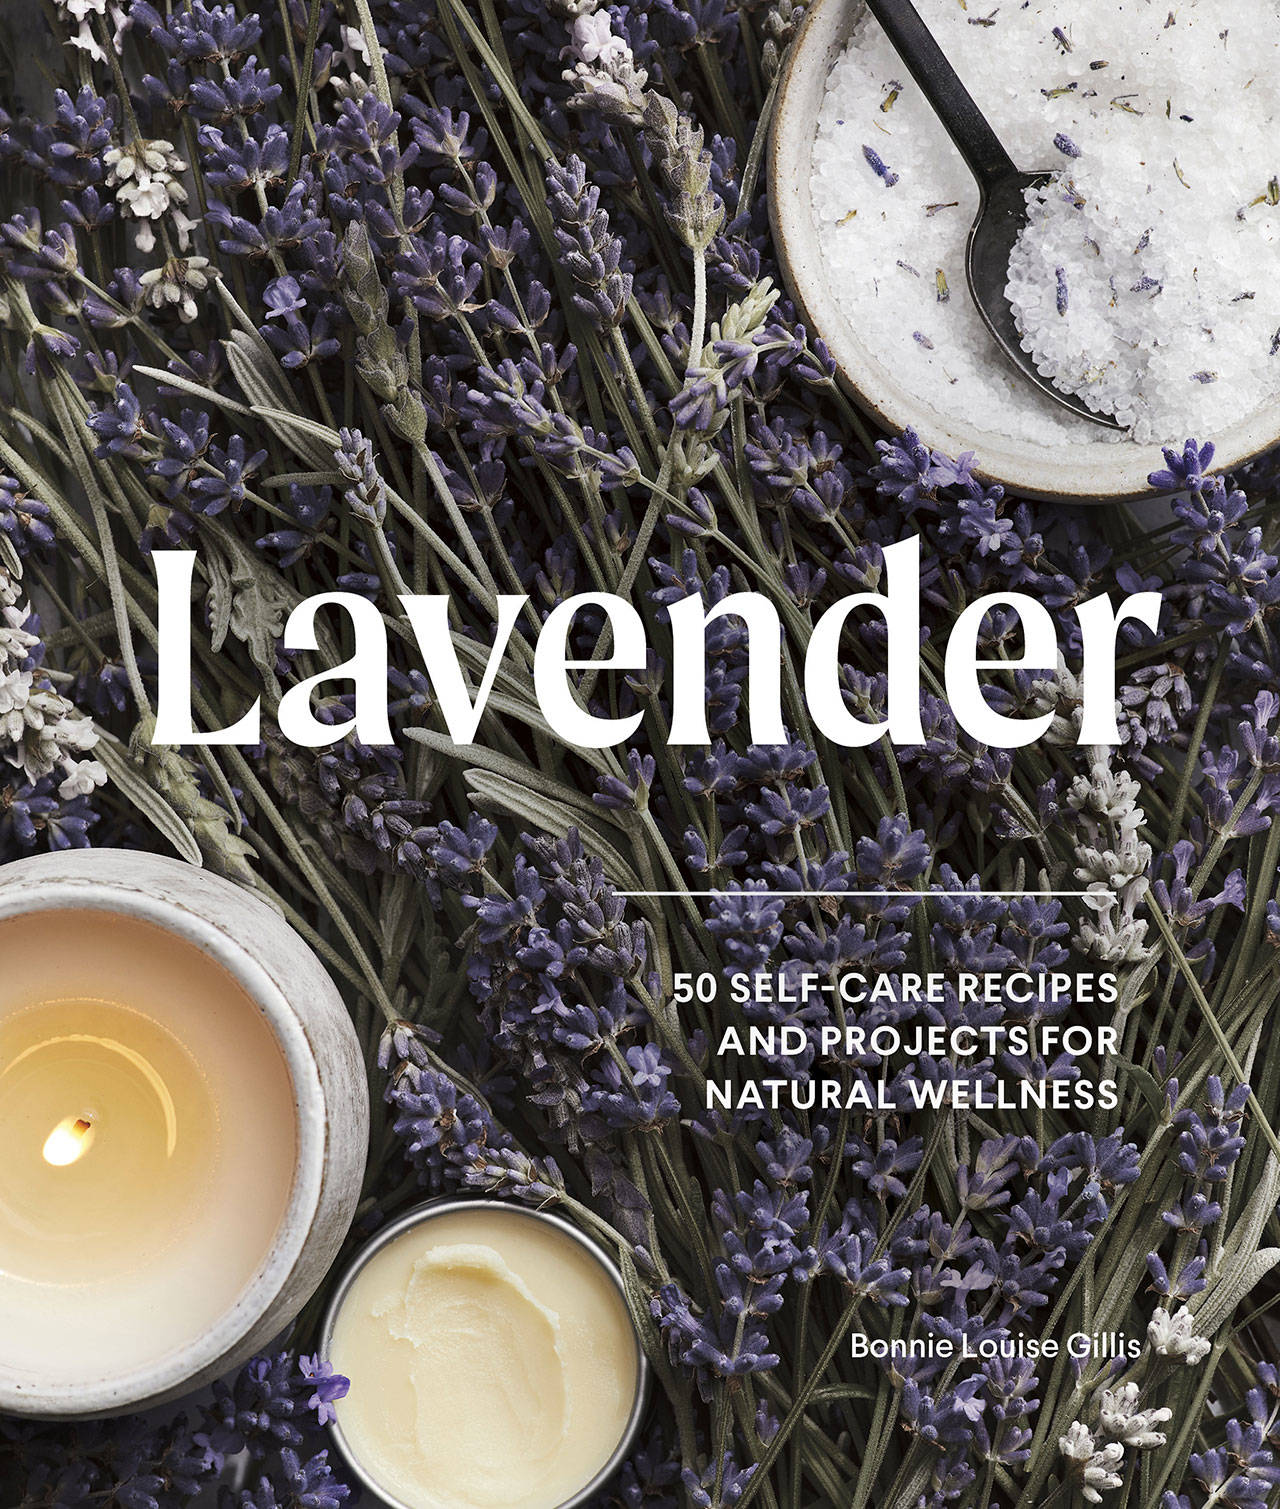 Sequim author Bonnie Louise Gillis’ “Lavender” is available in local and national book sellers in print and an e-edition through Sasquatch Books. Submitted artwork